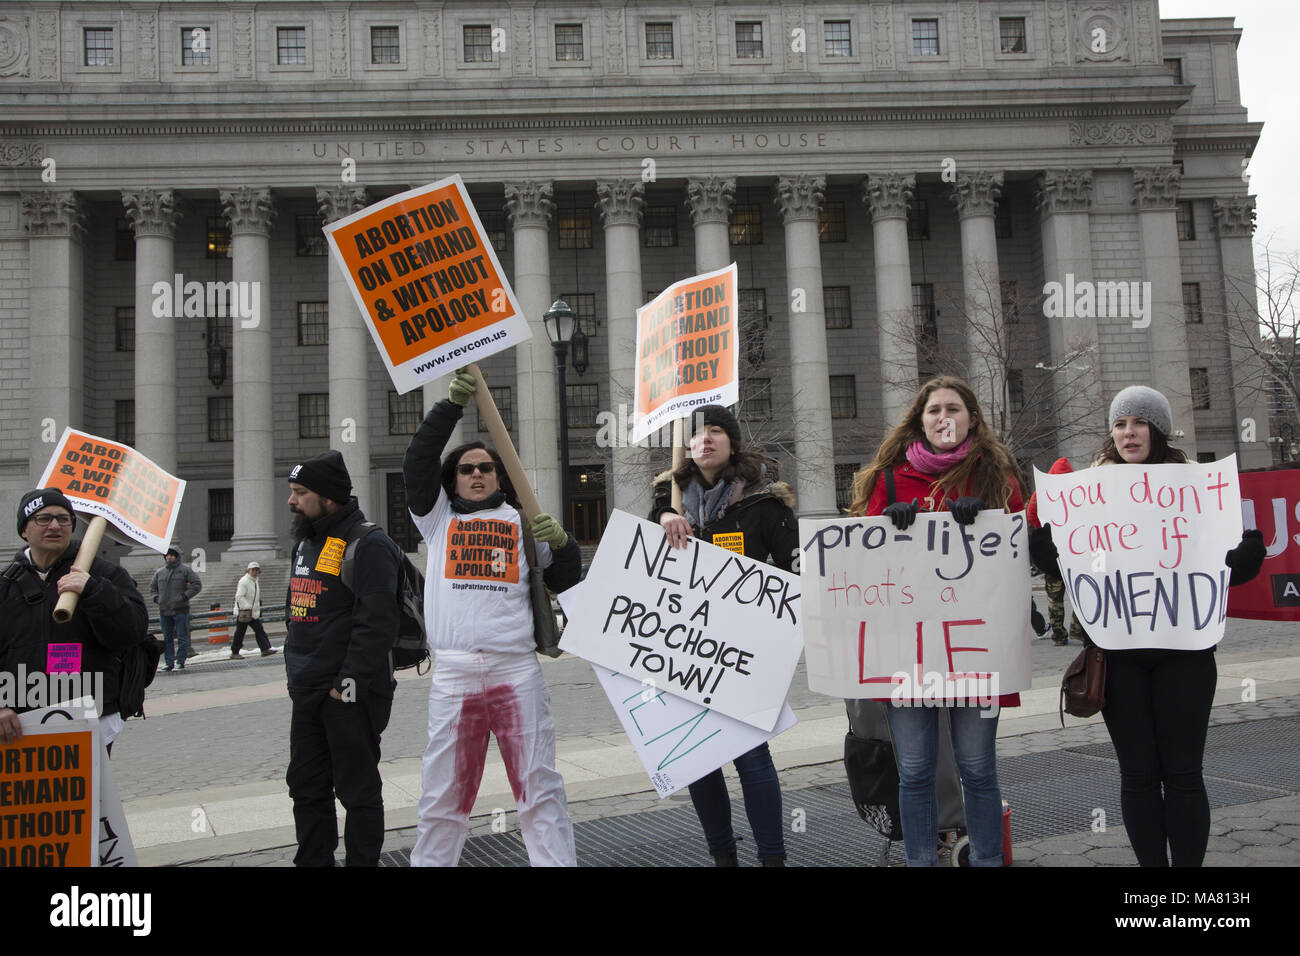 International Gift Of Life annual rally and walk of  Pro-Life groups & individuals took place on Palm Sunday March 24, 2018 in lower Manhattan. Pro-choice counter demonstrators make themselves heard near by. Stock Photo